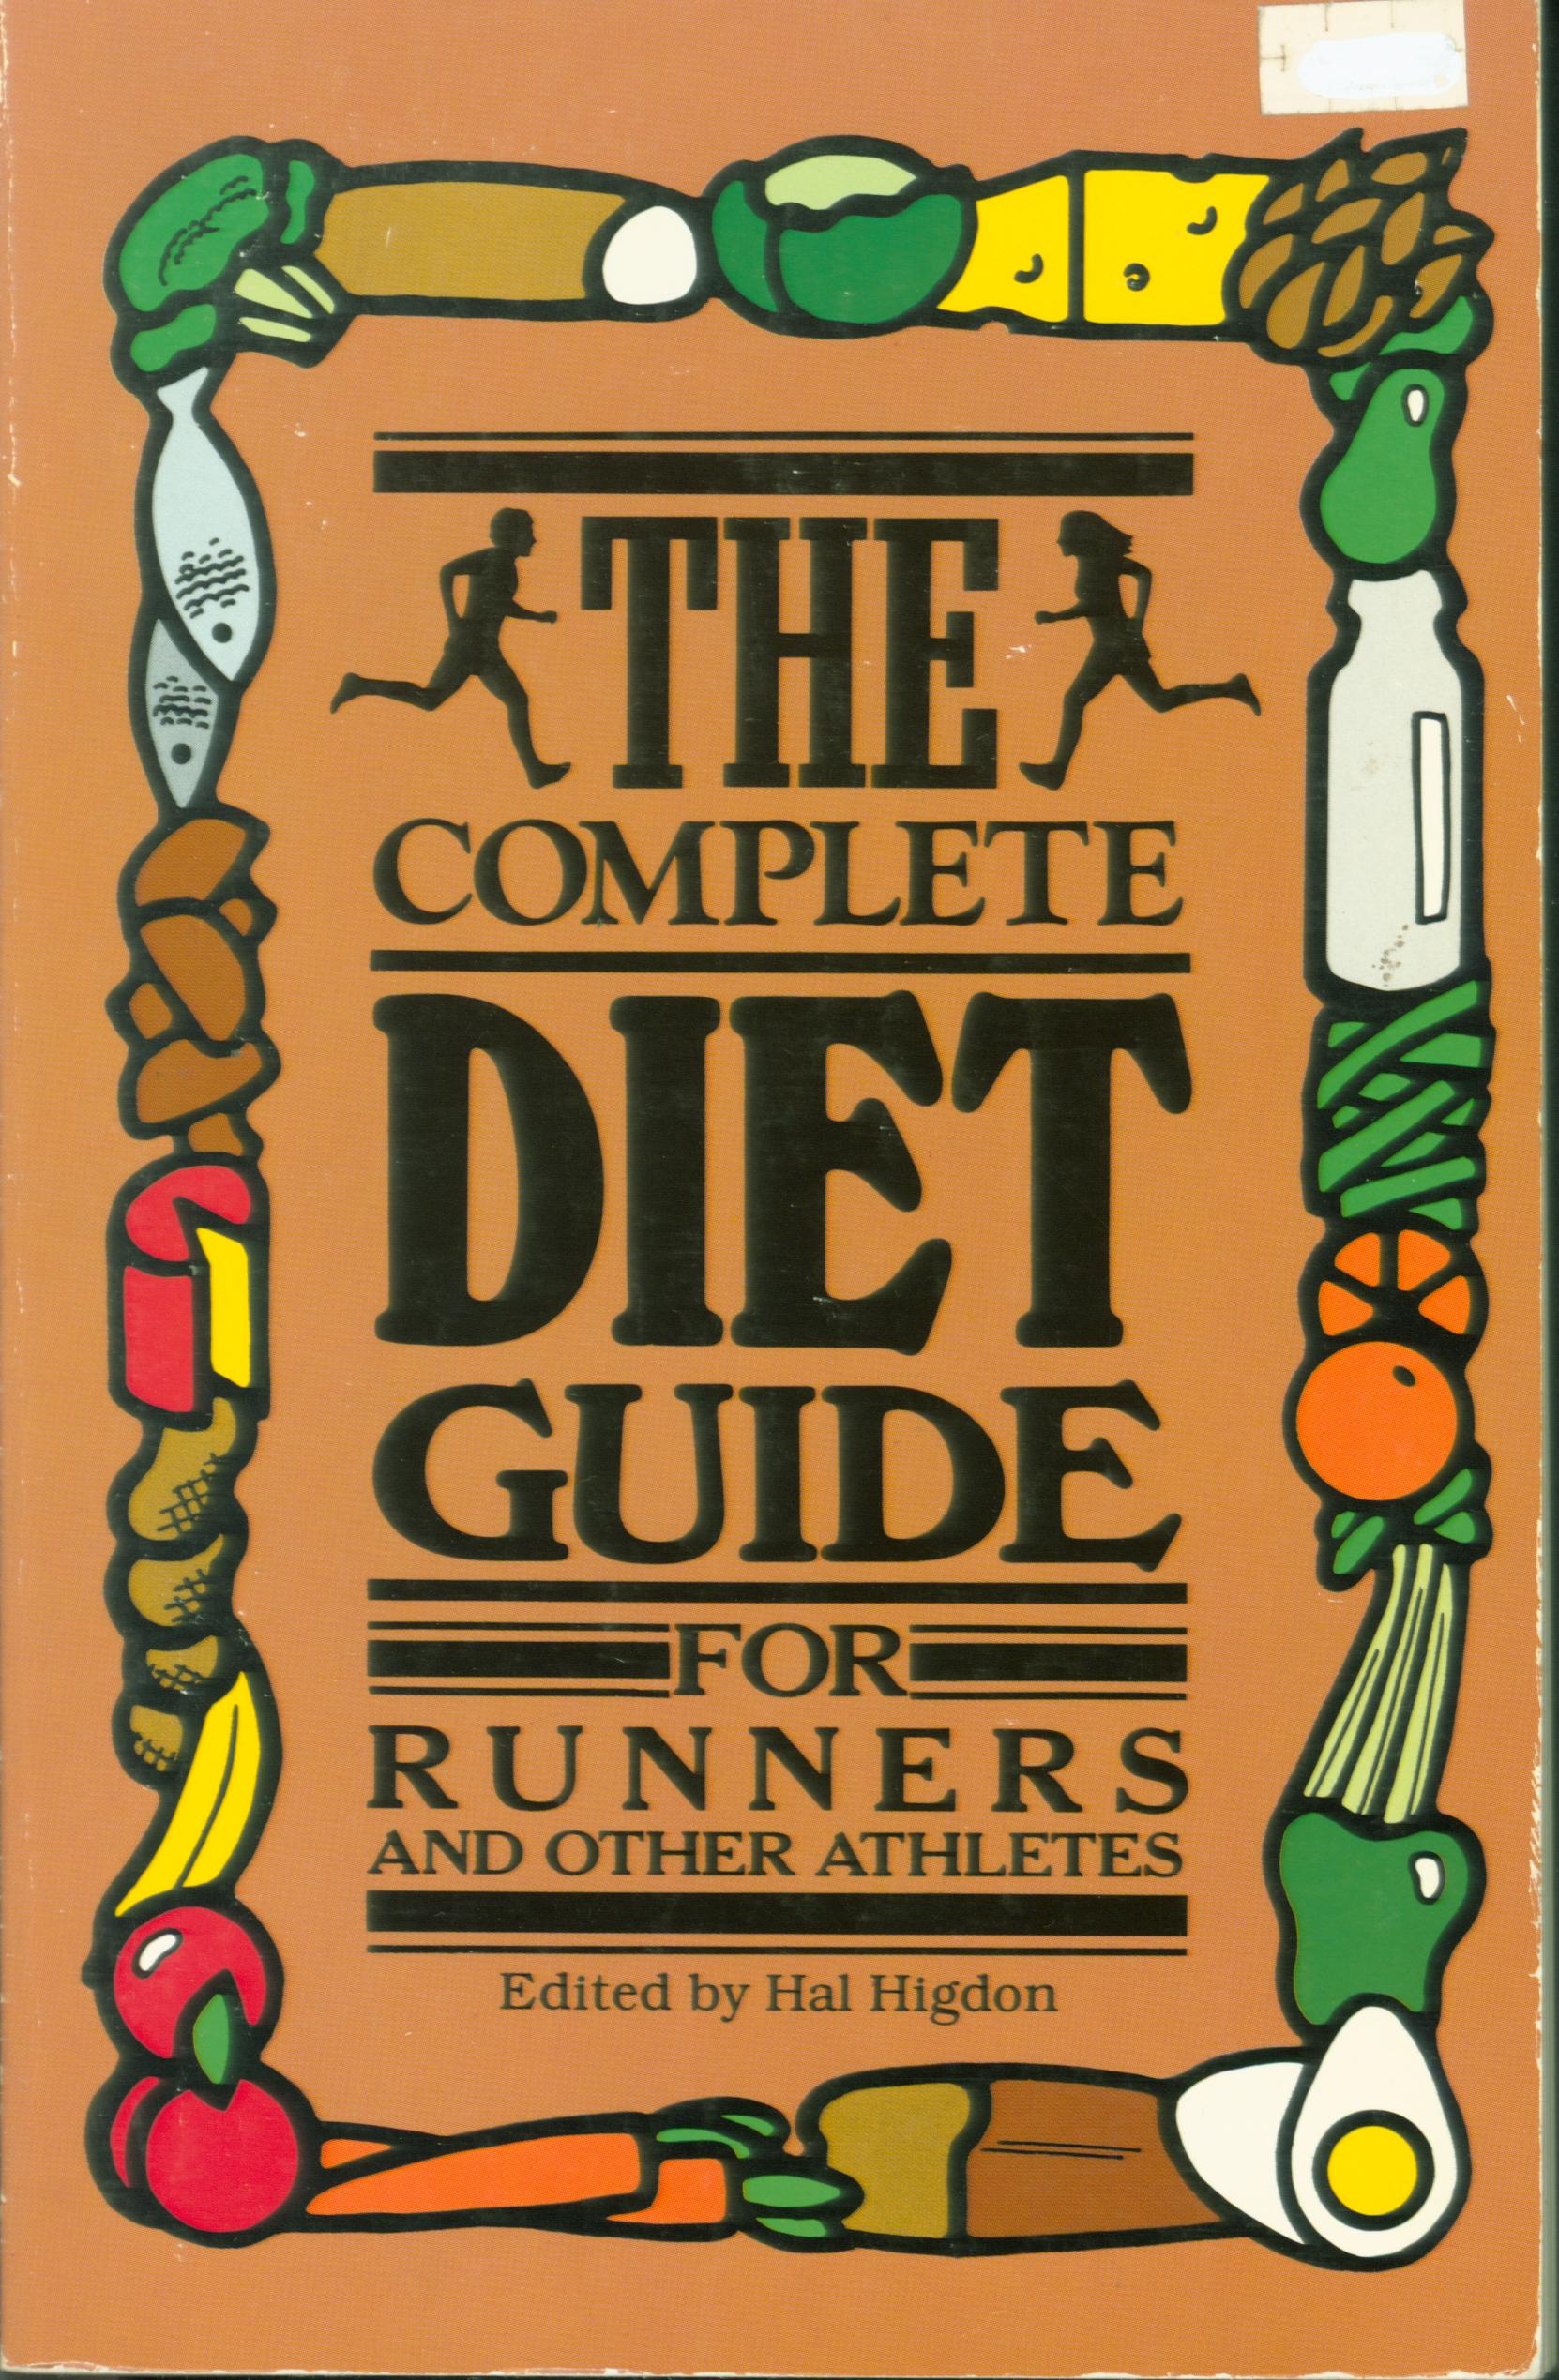 THE COMPLETE DIET GUIDE FOR RUNNERS & OTHER ATHLETES. 